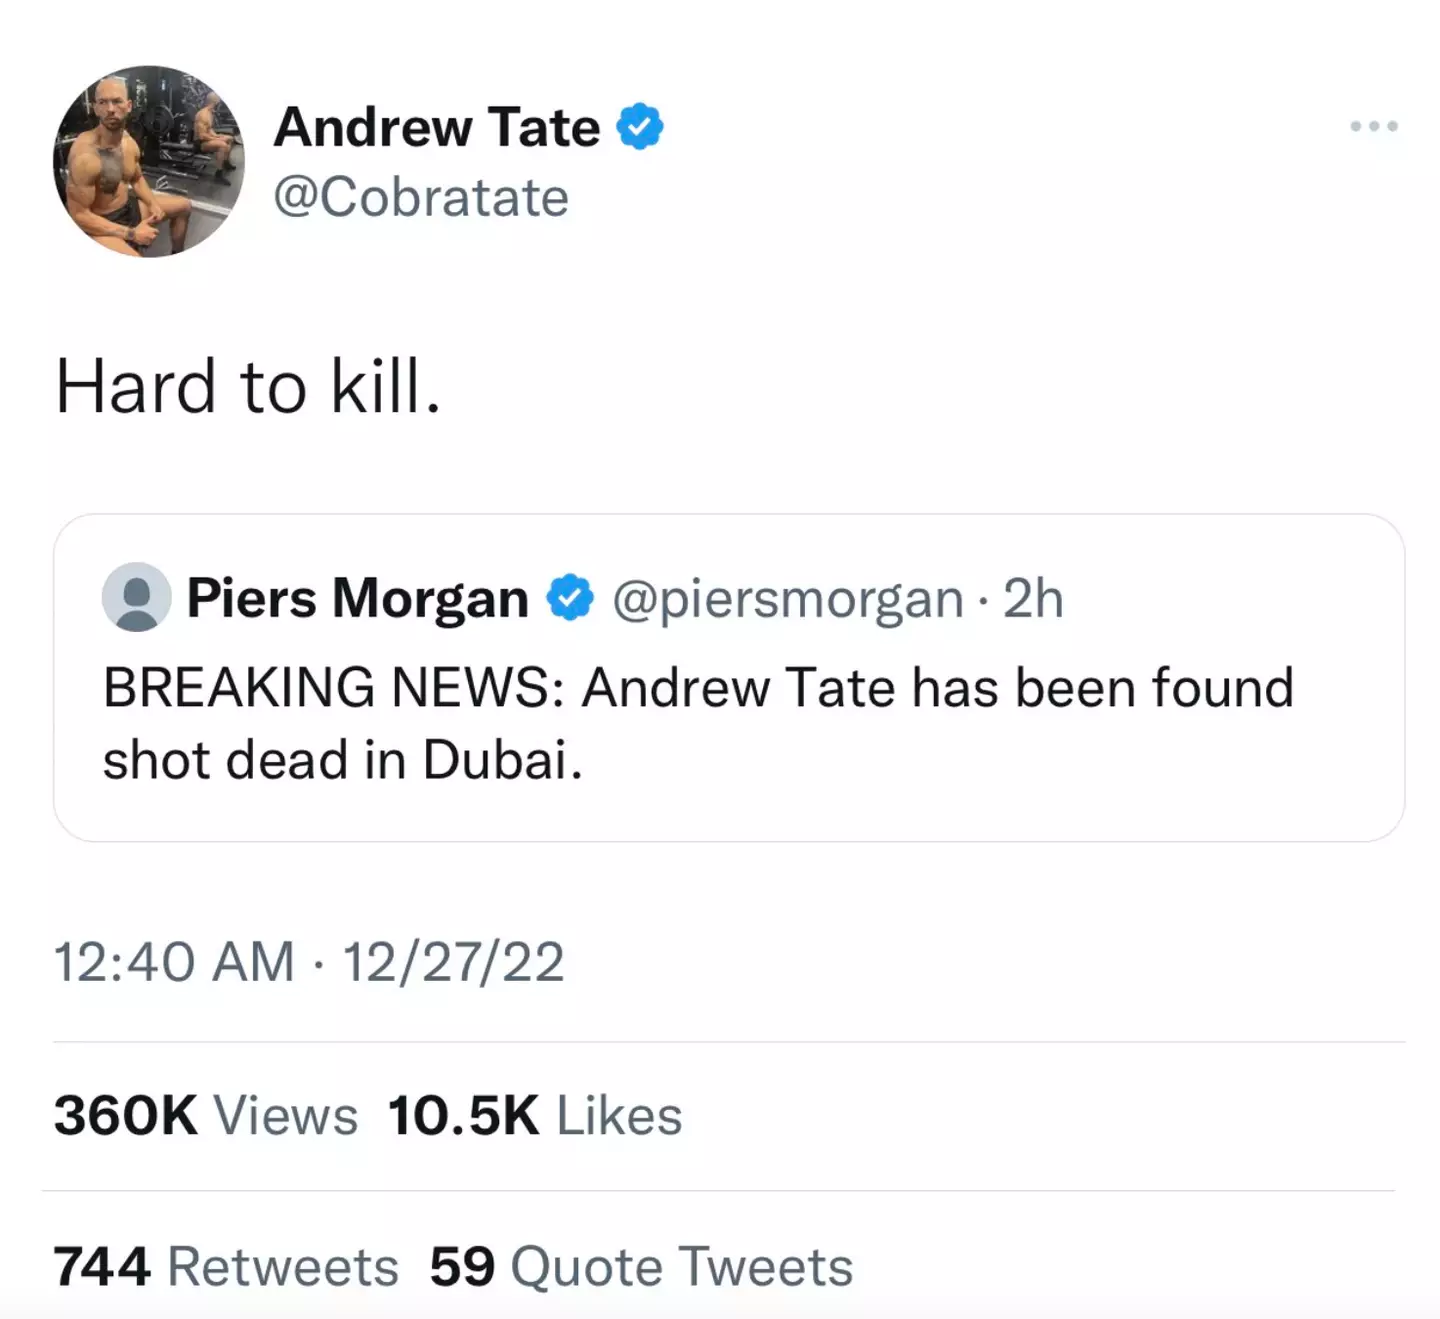 Andrew Tate confirmed that he is still alive.